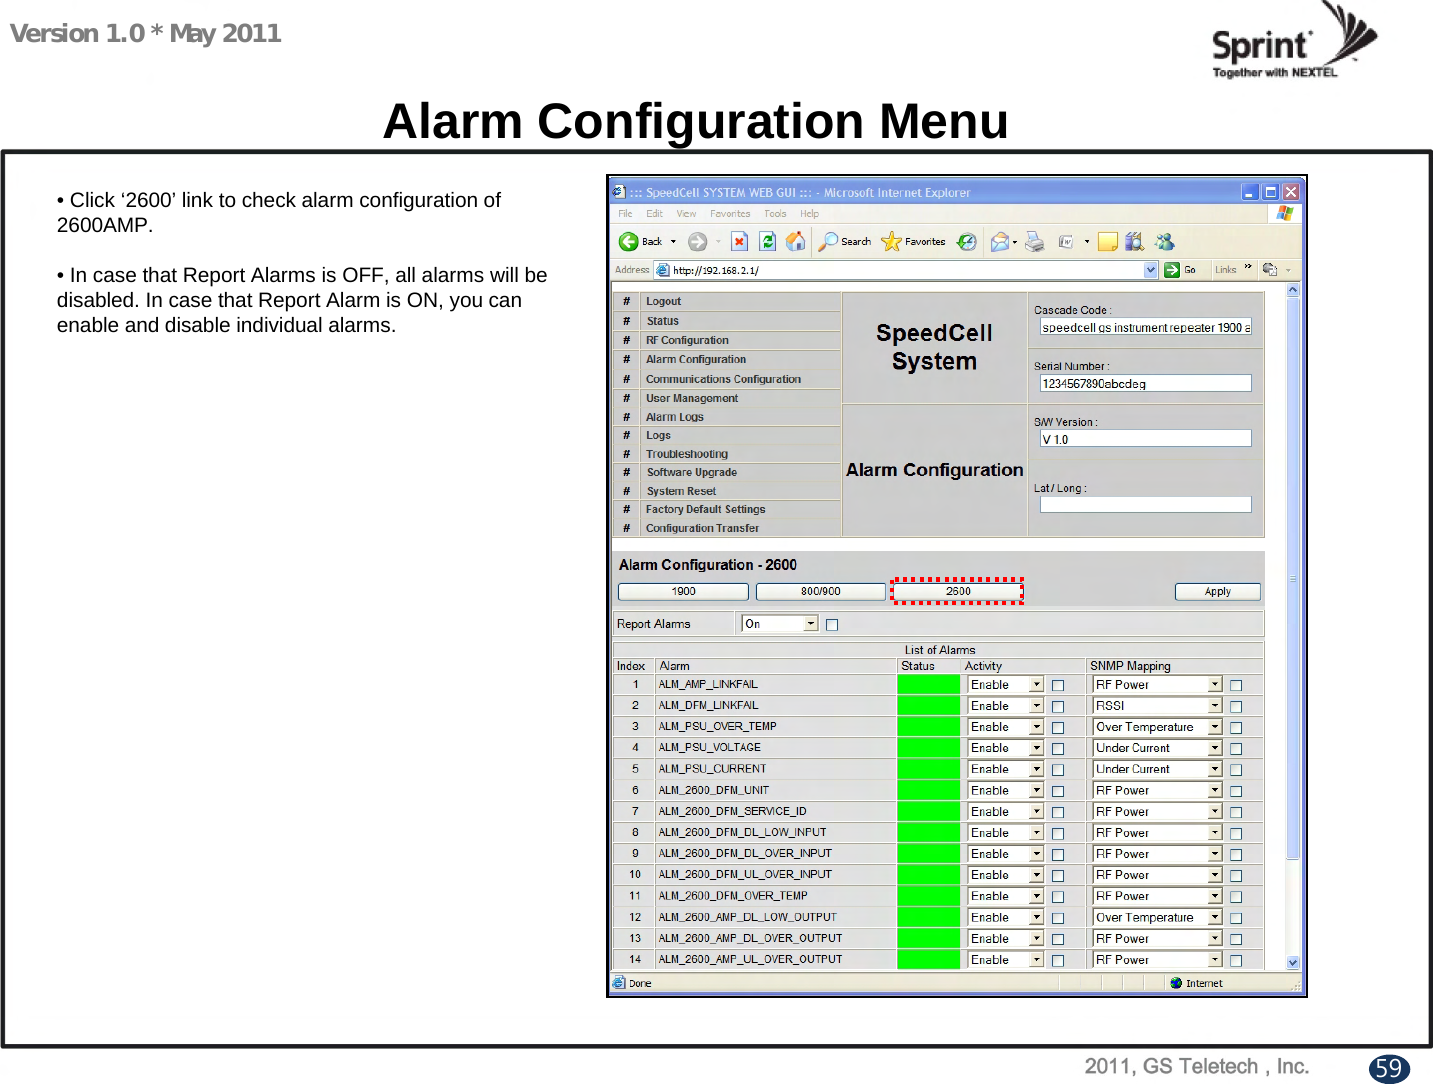 Version 1.0 * May 2011Alarm Configuration Menu• Click ‘2600’ link to check alarm configuration of  2600AMP.• In case that Report Alarms is OFF, all alarms will be disabled. In case that Report Alarm is ON, you can enable and disable individual alarms.59